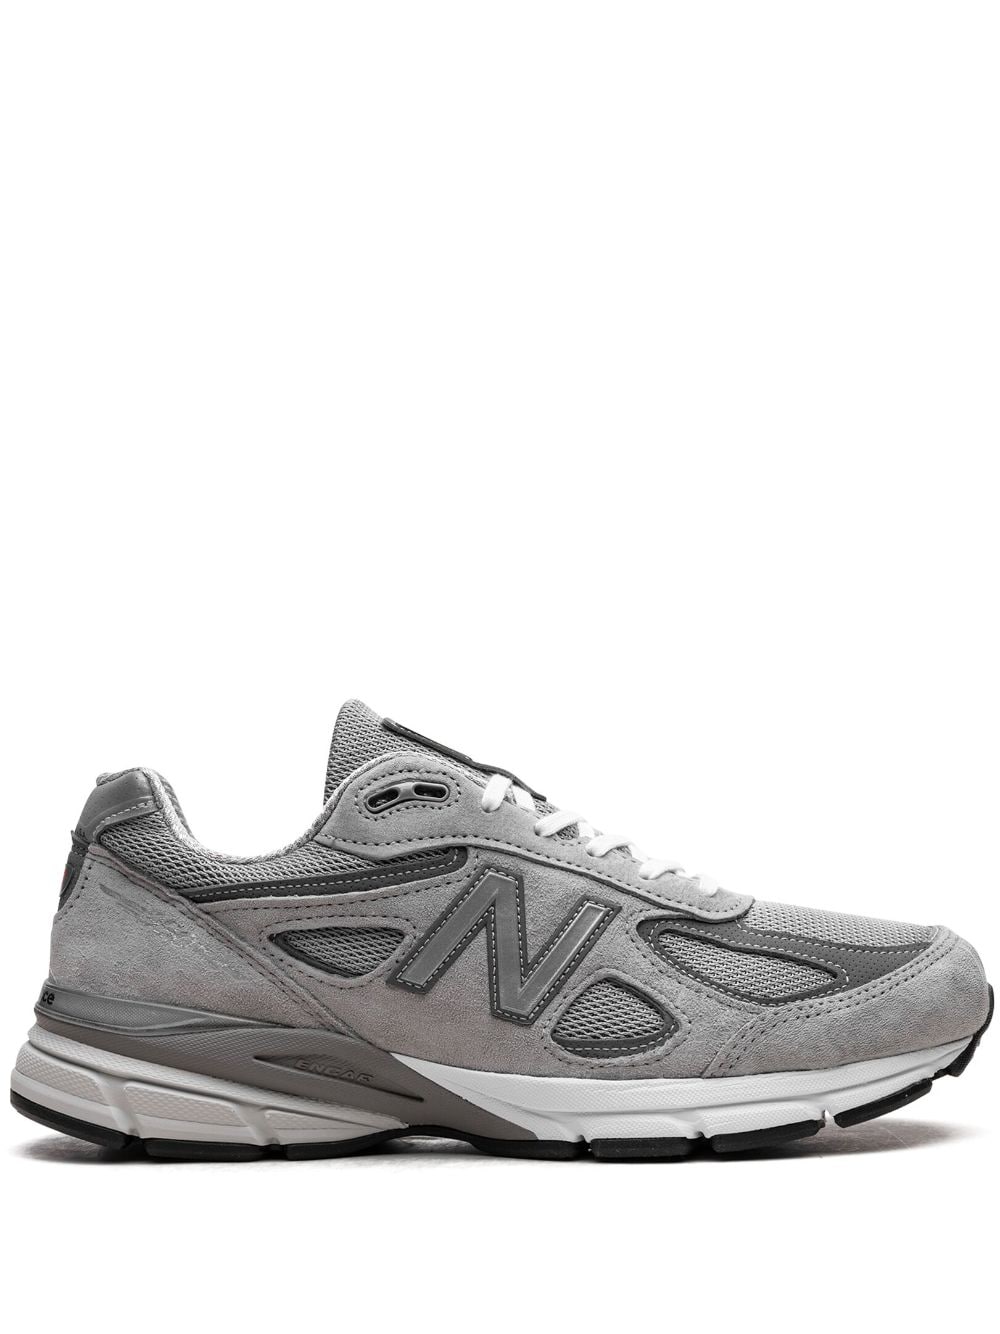 New Balance Made in USA 990v4 leather sneakers - Grey von New Balance